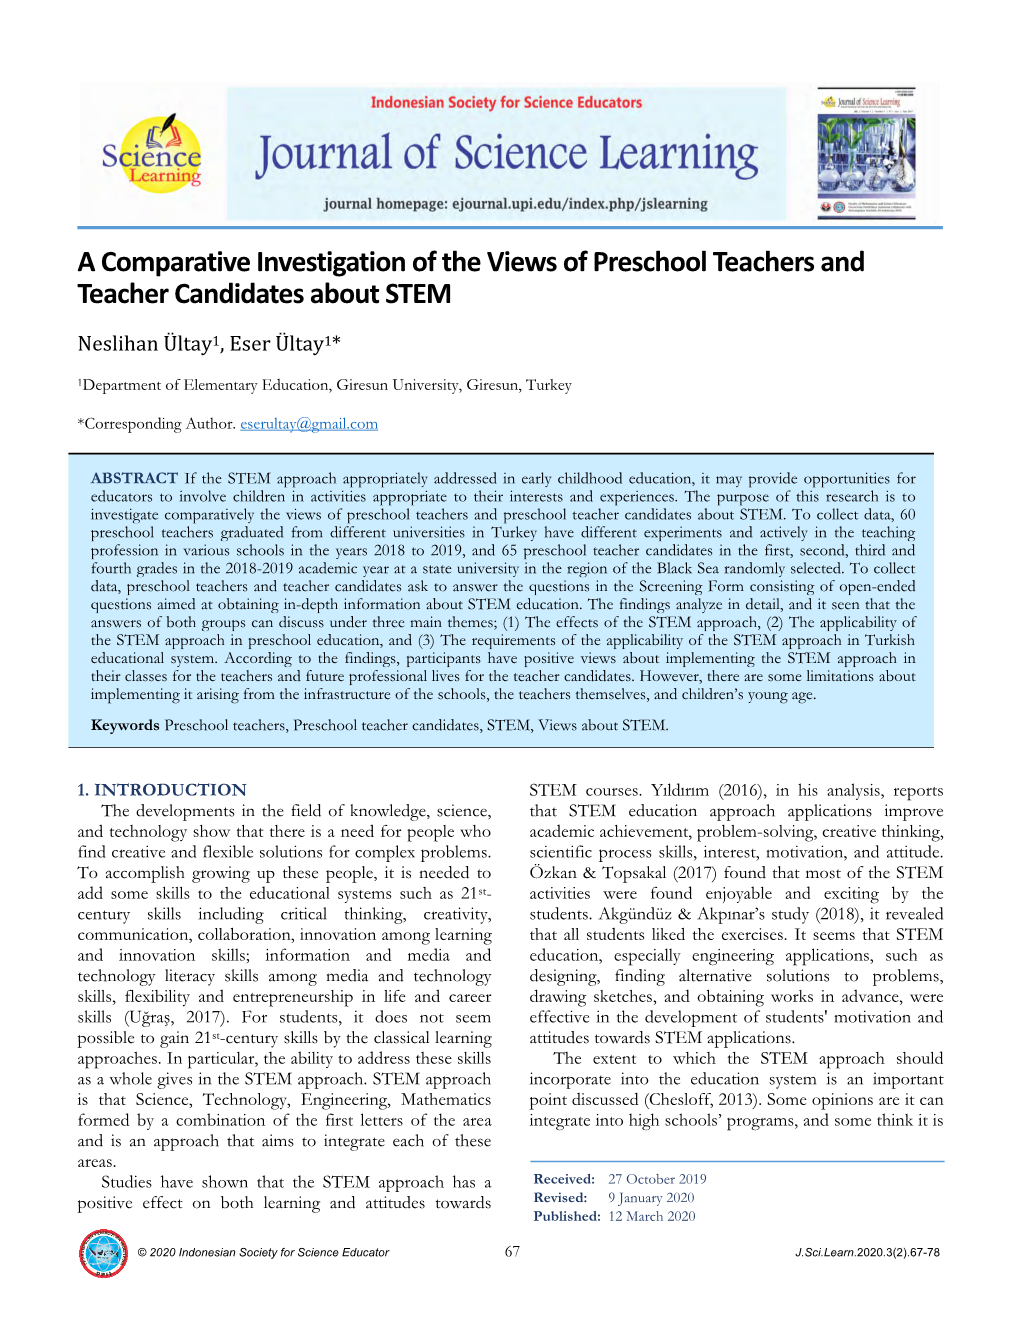 A Comparative Investigation of the Views of Preschool Teachers and Teacher Candidates About STEM